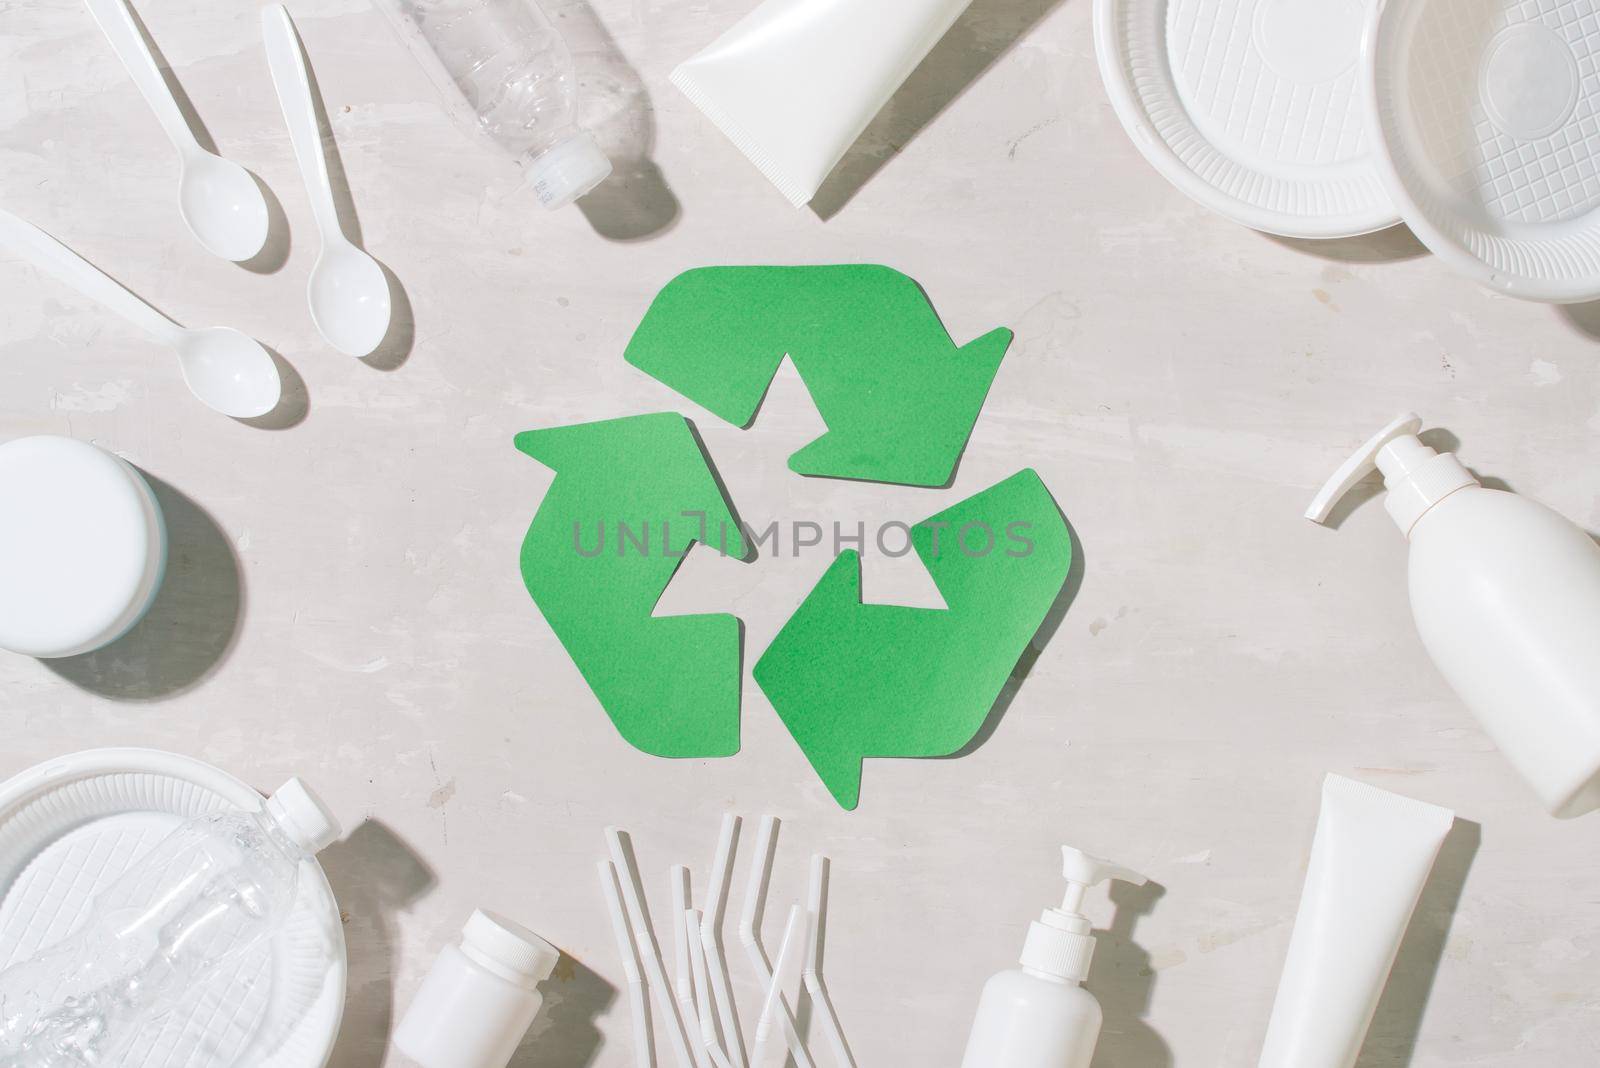 A selection of garbage for recycling. Segregated metal, plastic, paper and glass
